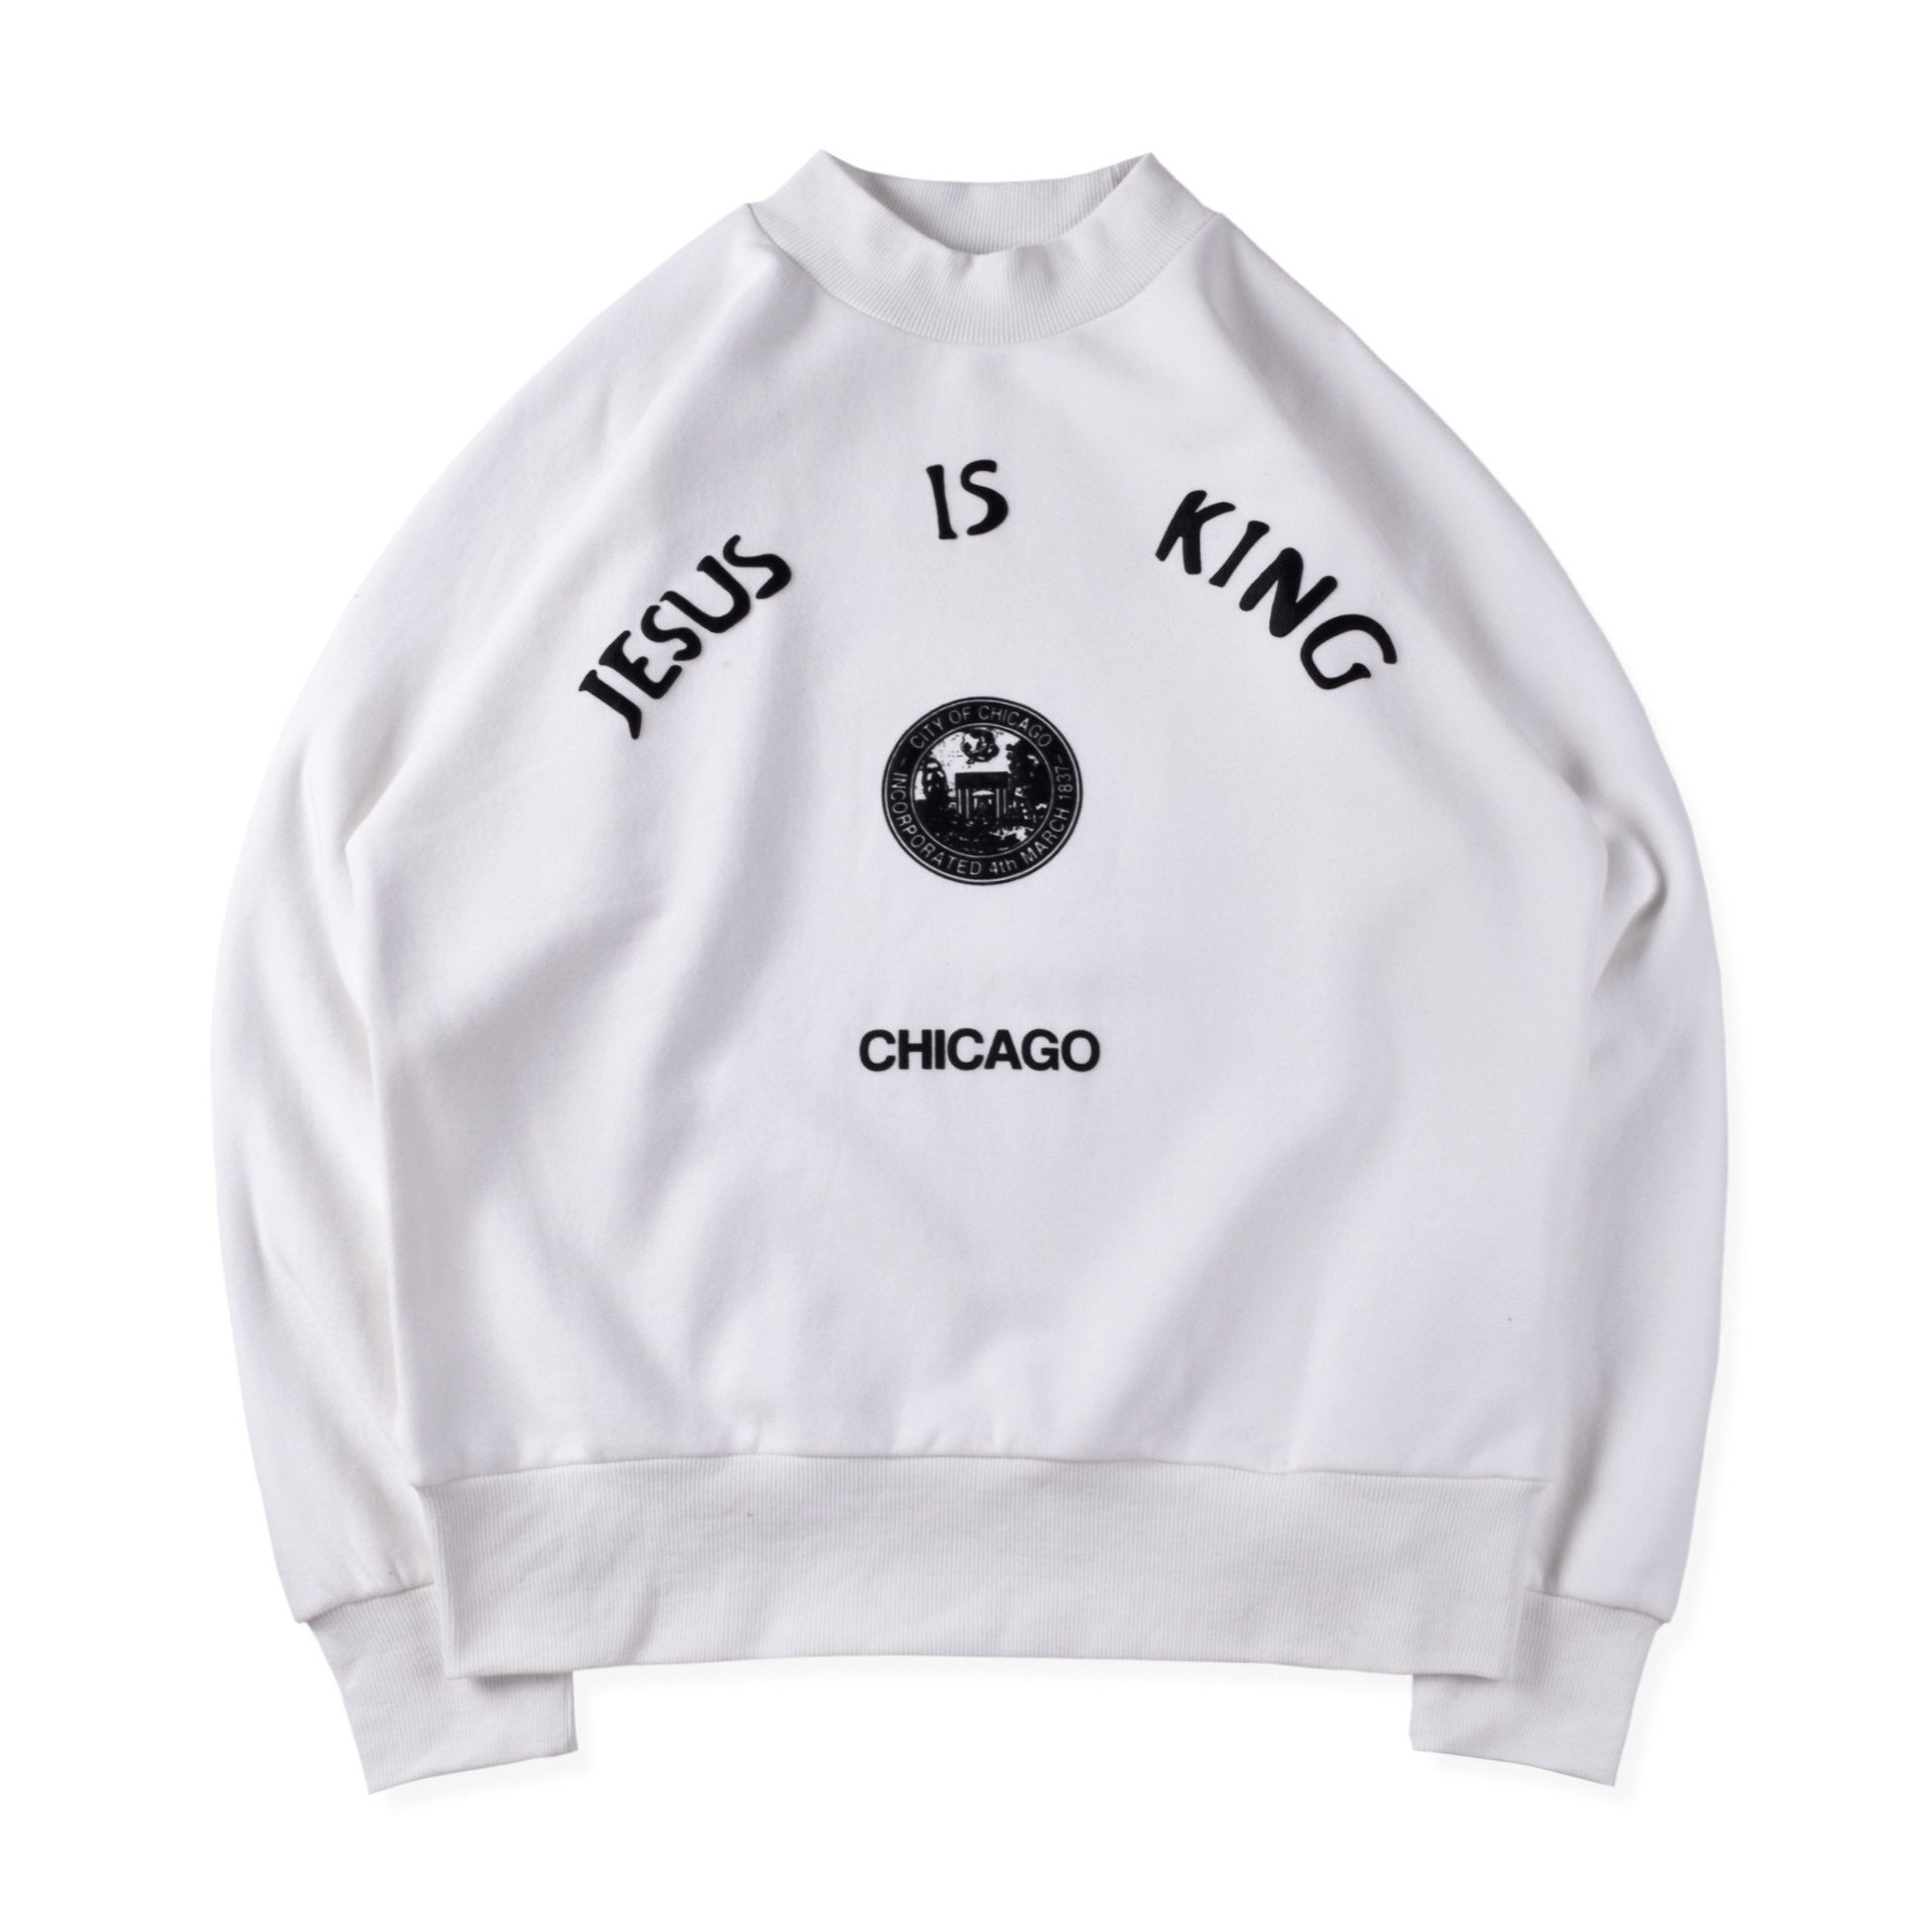 Kanye West Jesus Is King Chicago Sweater